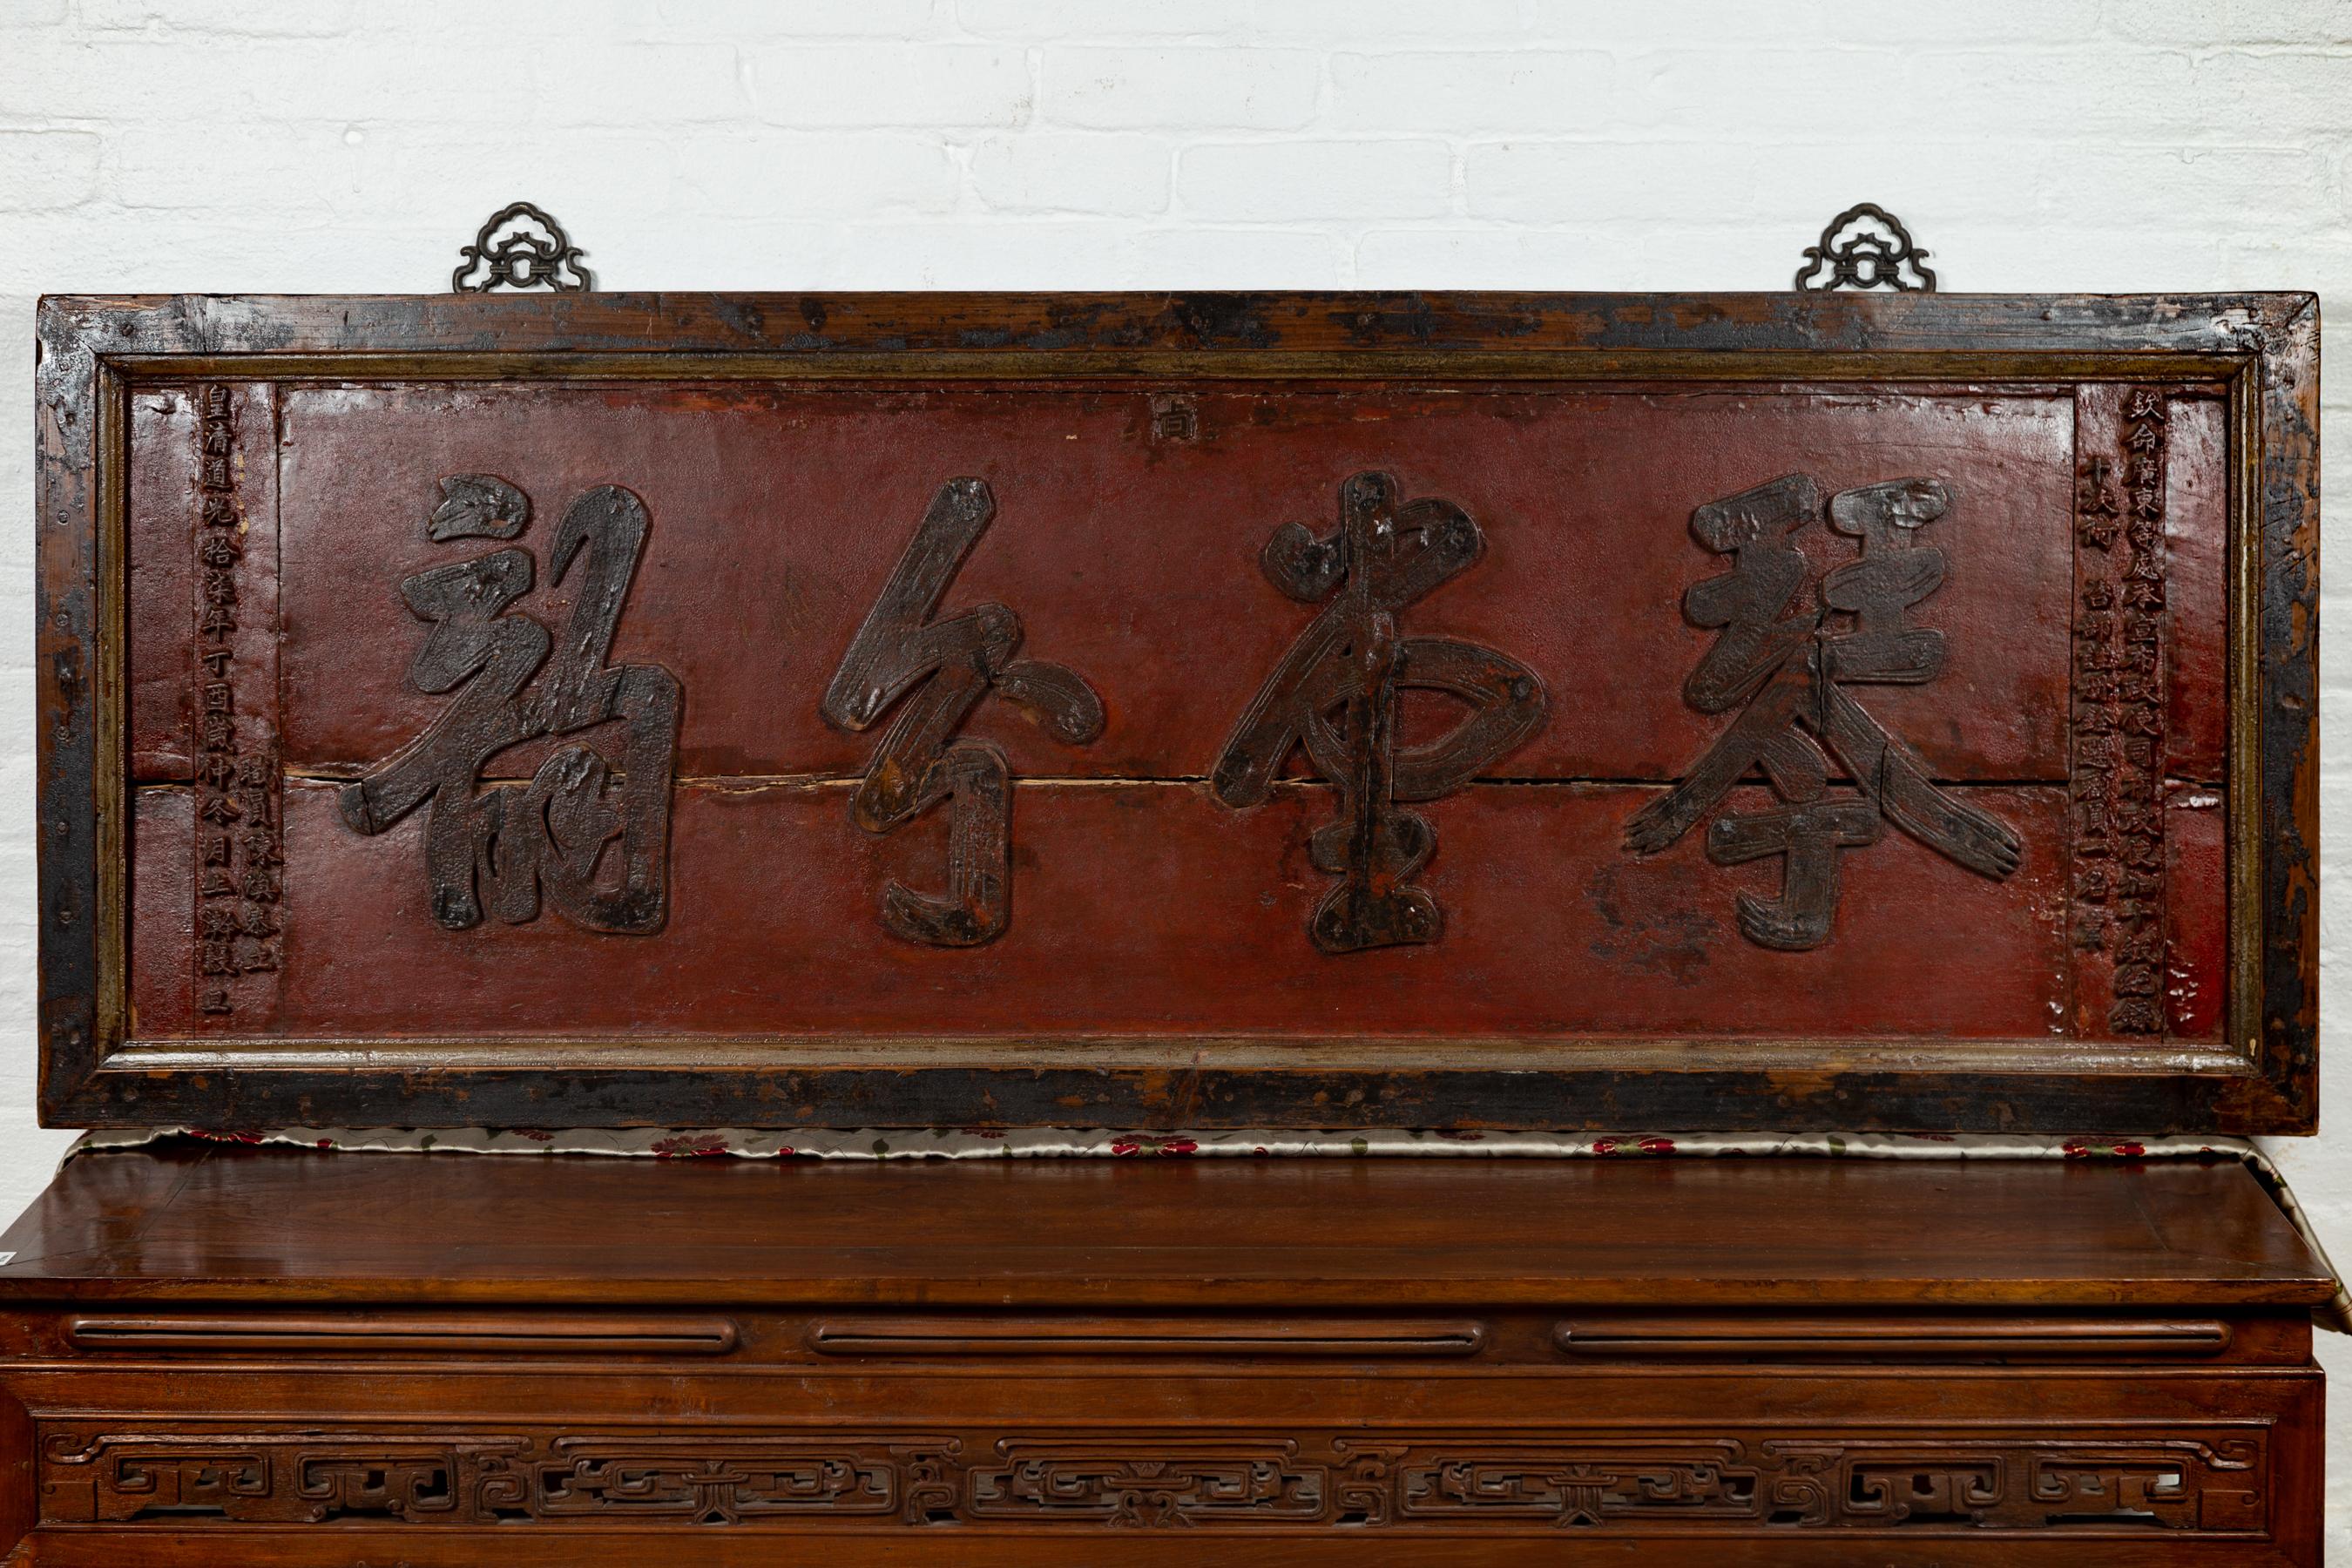 A Chinese antique red lacquered shop sign from the early 20th century, with black calligraphy. Attracting our eyes with its large proportions and red lacquered ground, this large horizontal shop sign will make for a great wall decor. Placed above a